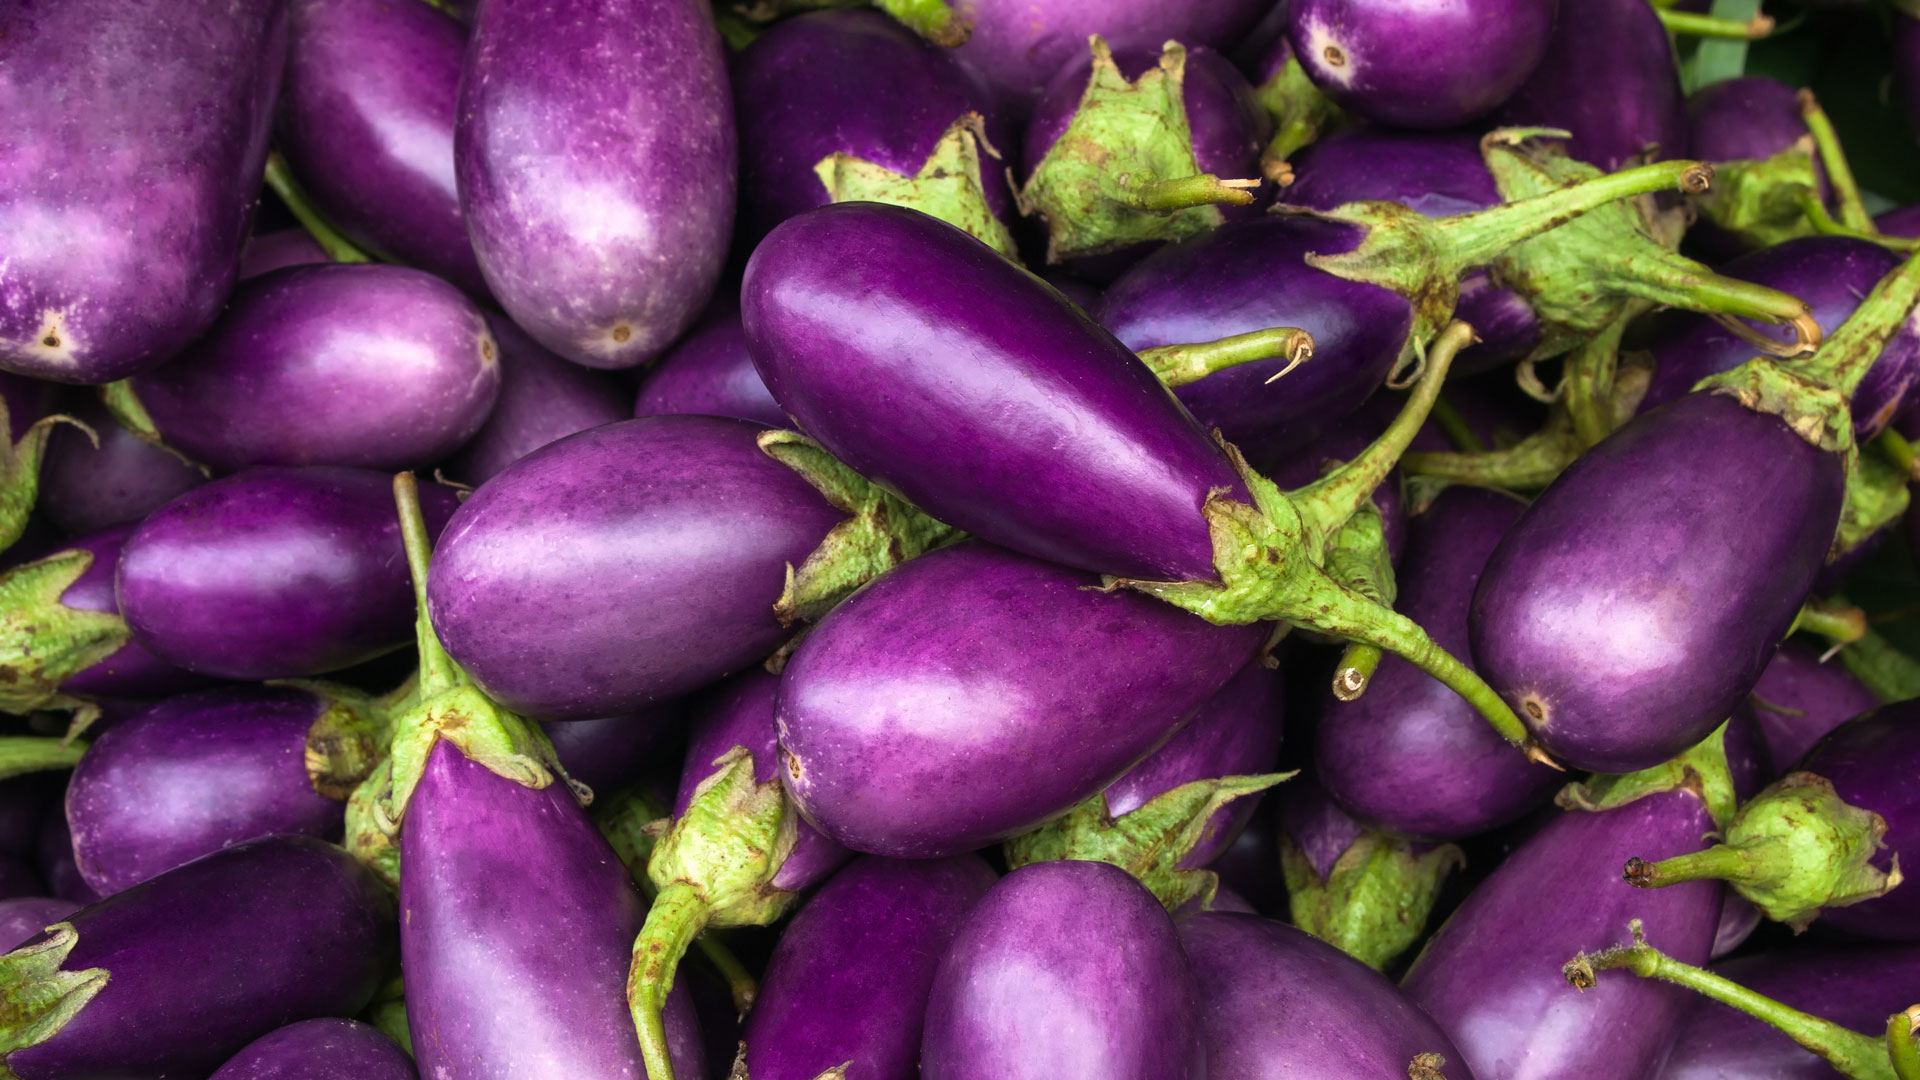 A pile of fresh purple eggplants with green stems. The eggplants are various sizes and shapes, showcasing their glossy, smooth skin and vibrant color. They are closely packed together, filling the entire frame of the image.